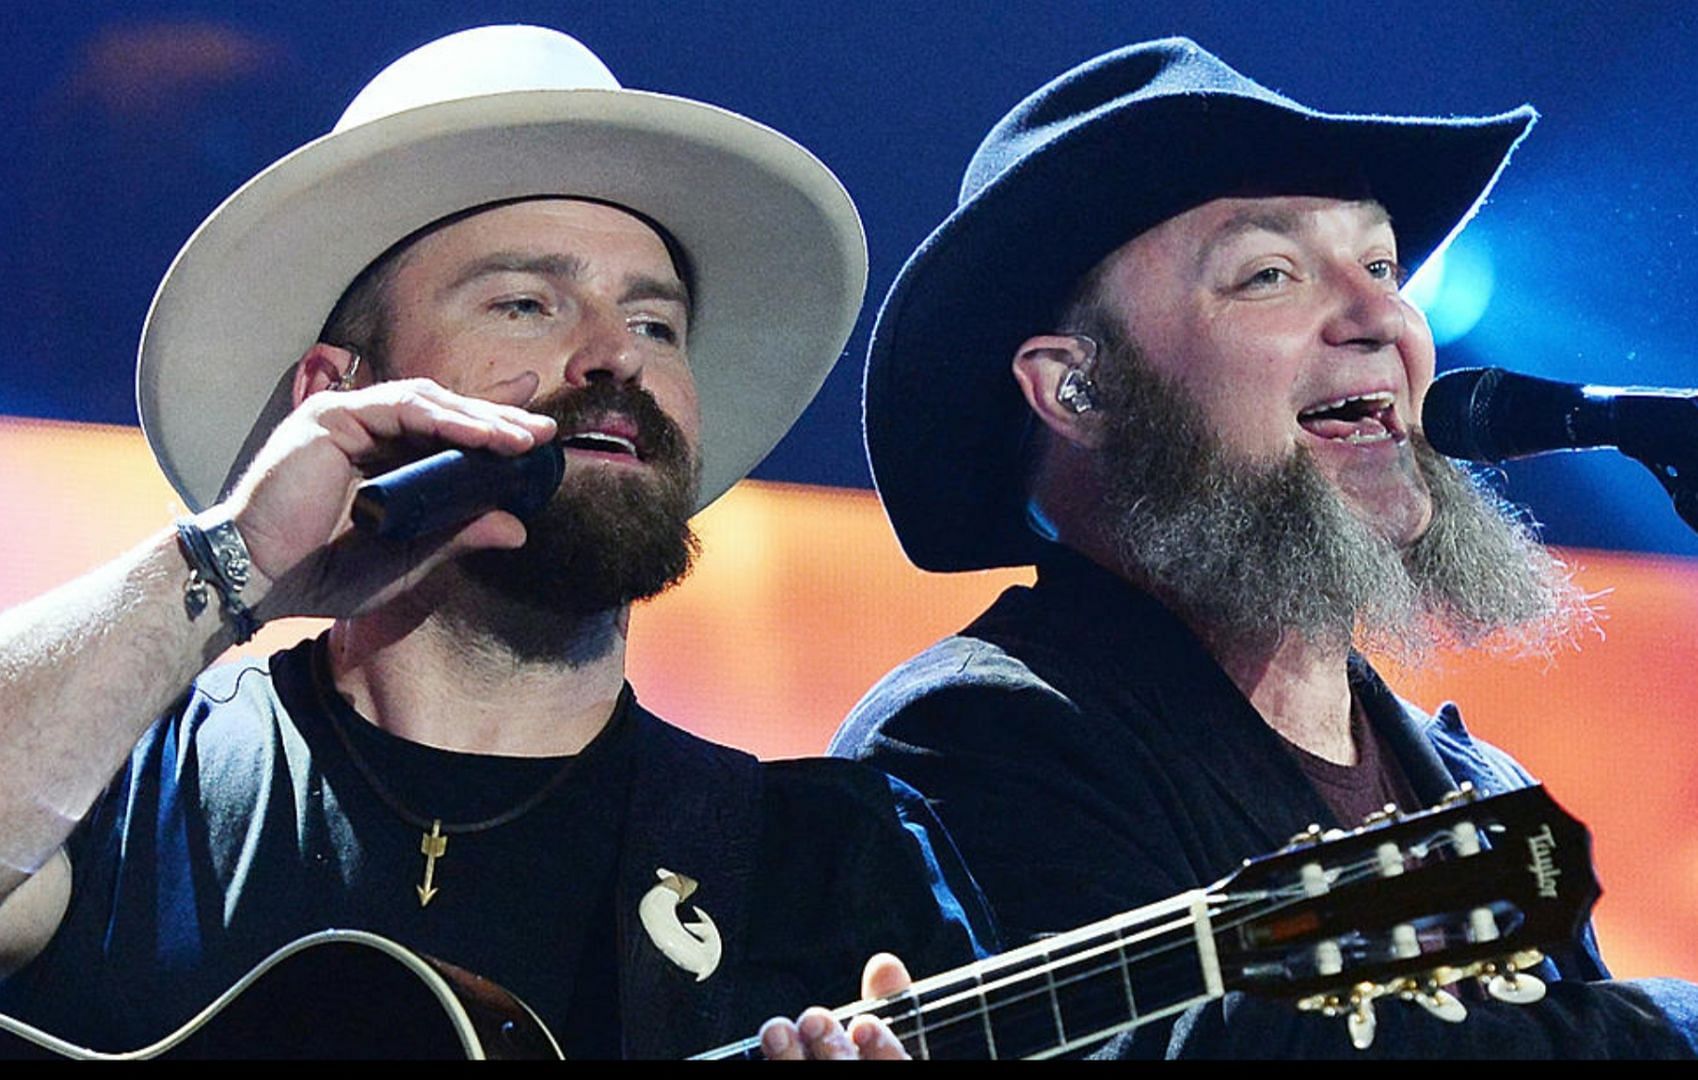 John Dreskill Hopkins is currently on tour with Zac Brown Band. (Image via Ethan Miller / Getty)